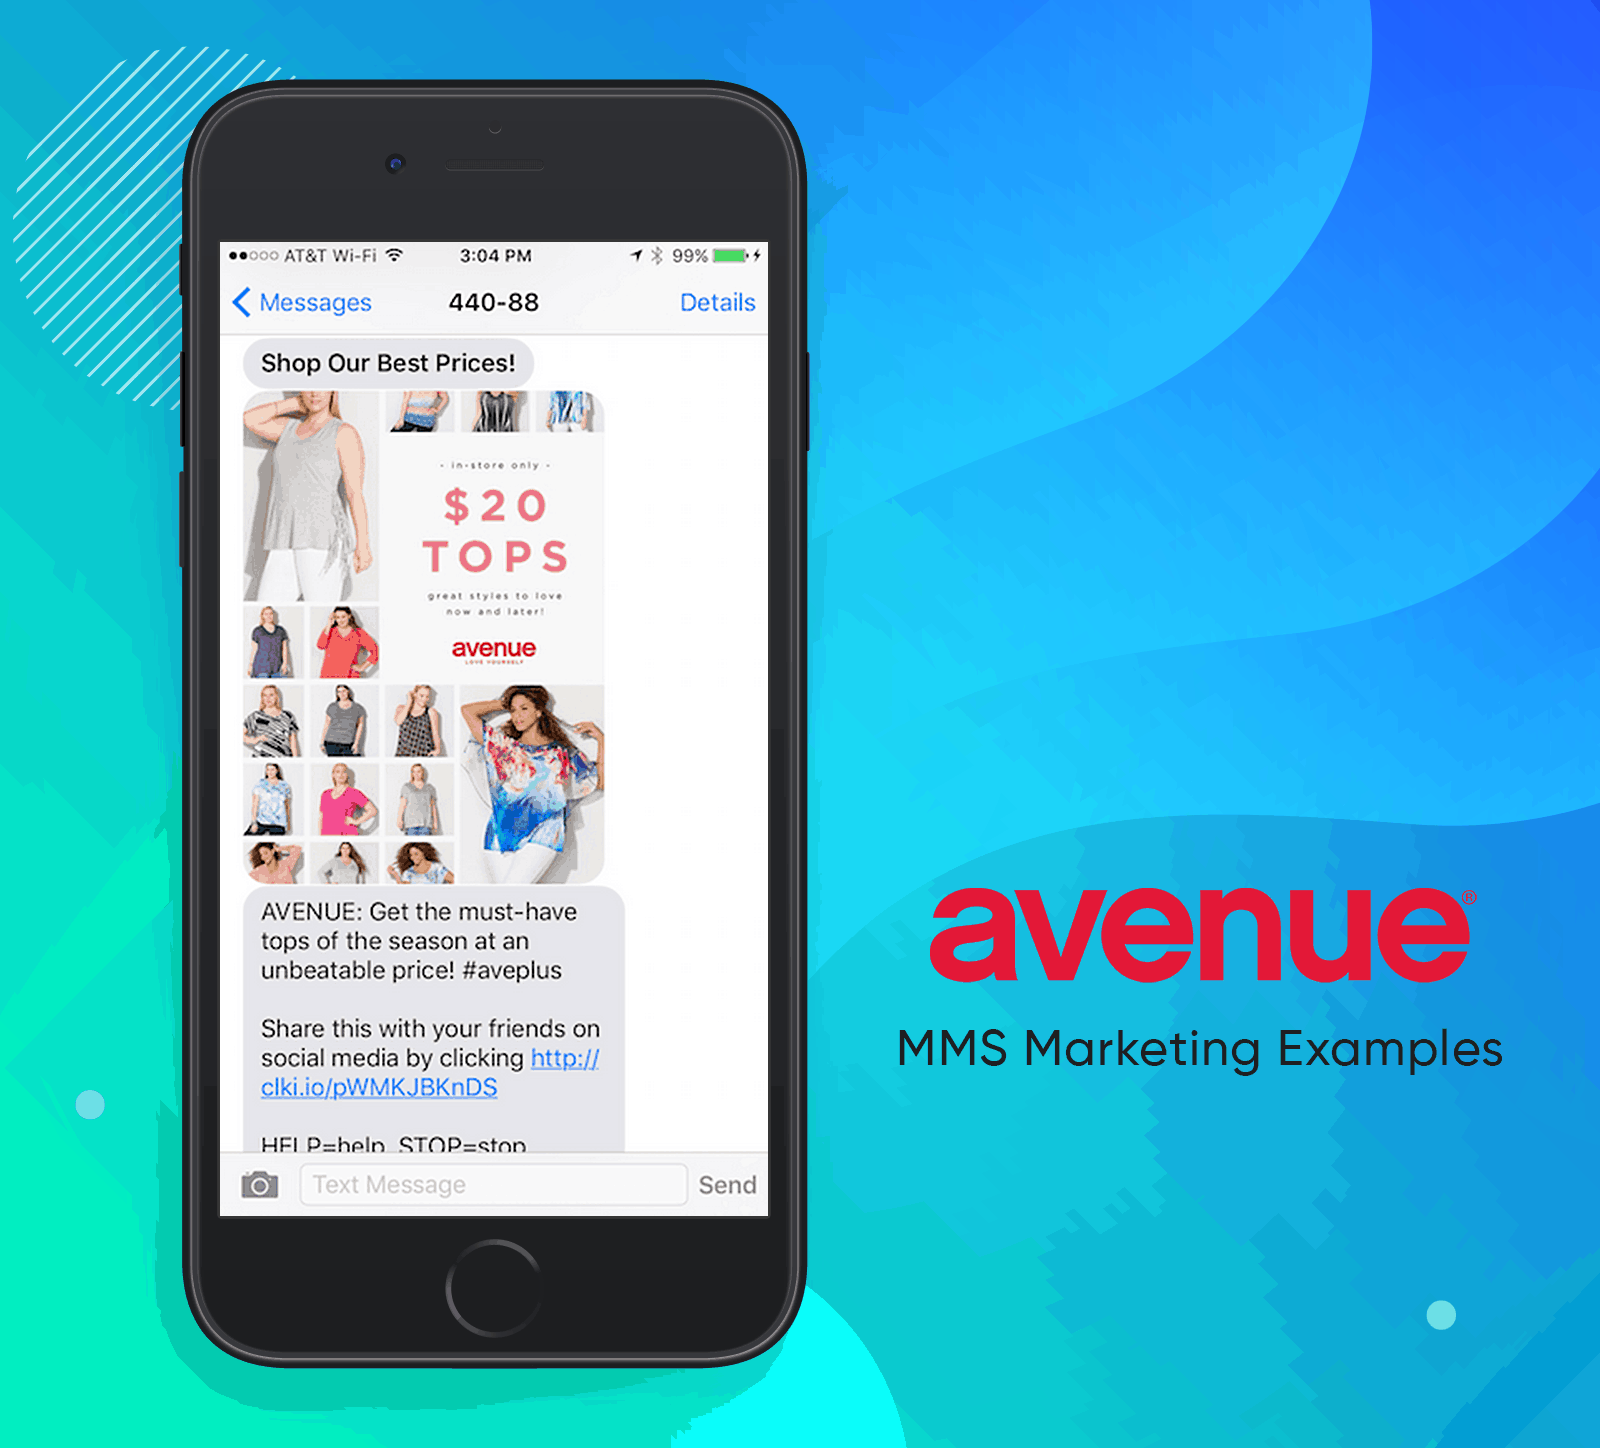 MMS Marketing Examples From Avenue Retail Stores - Shop Our Best Prices